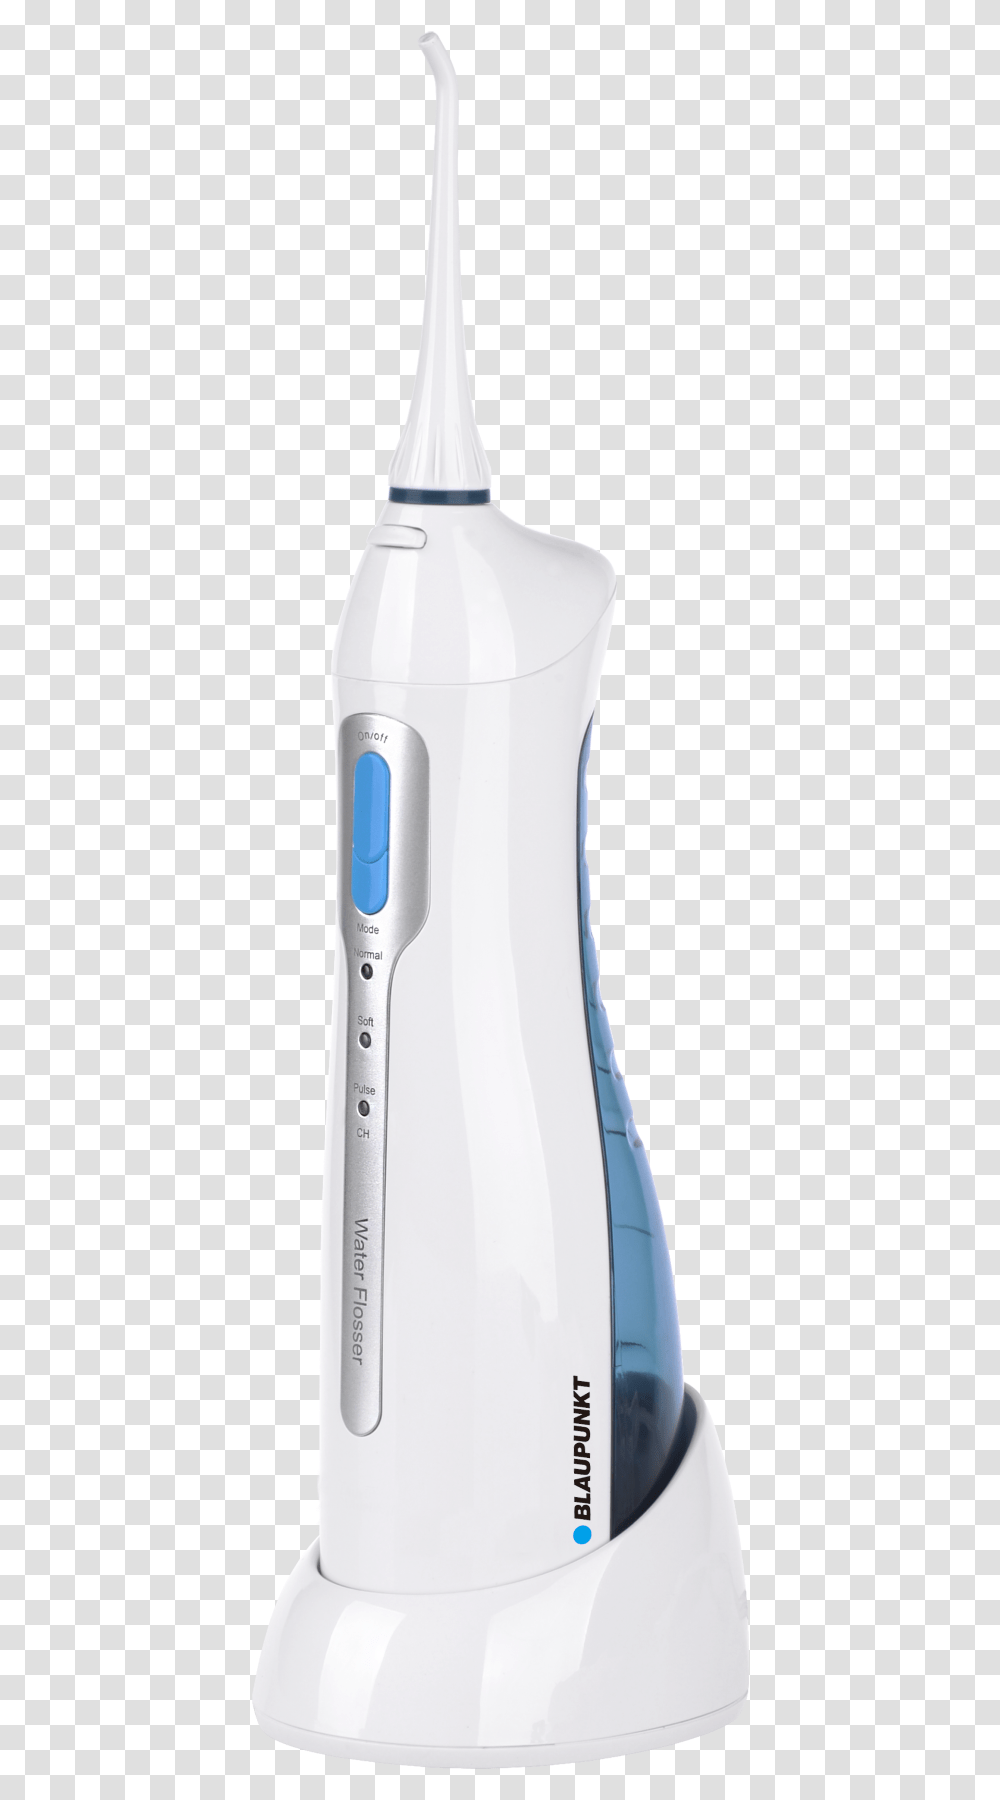 Medical Thermometer, Appliance, Clothes Iron, Mixer, Toothbrush Transparent Png